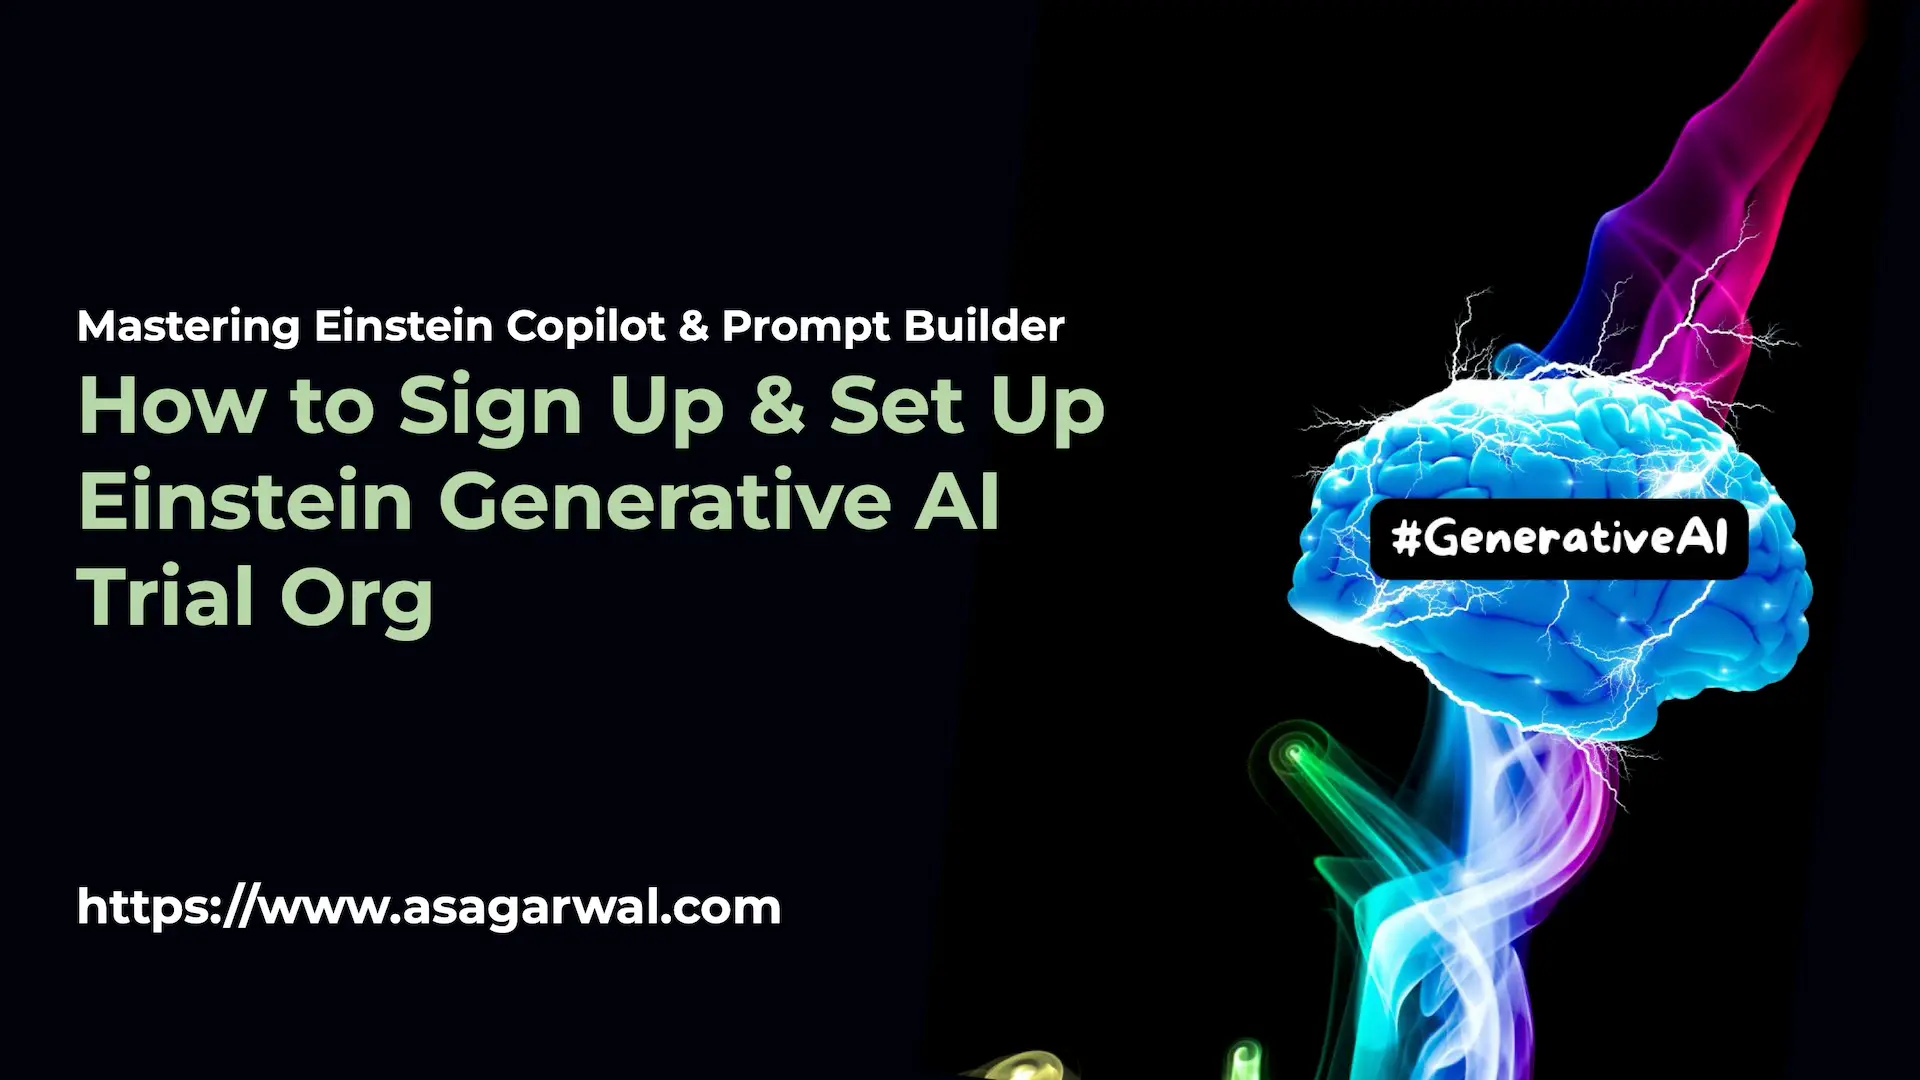 How to Sign Up & Set Up Einstein Generative AI Trial Org - Presentation Thumbnail